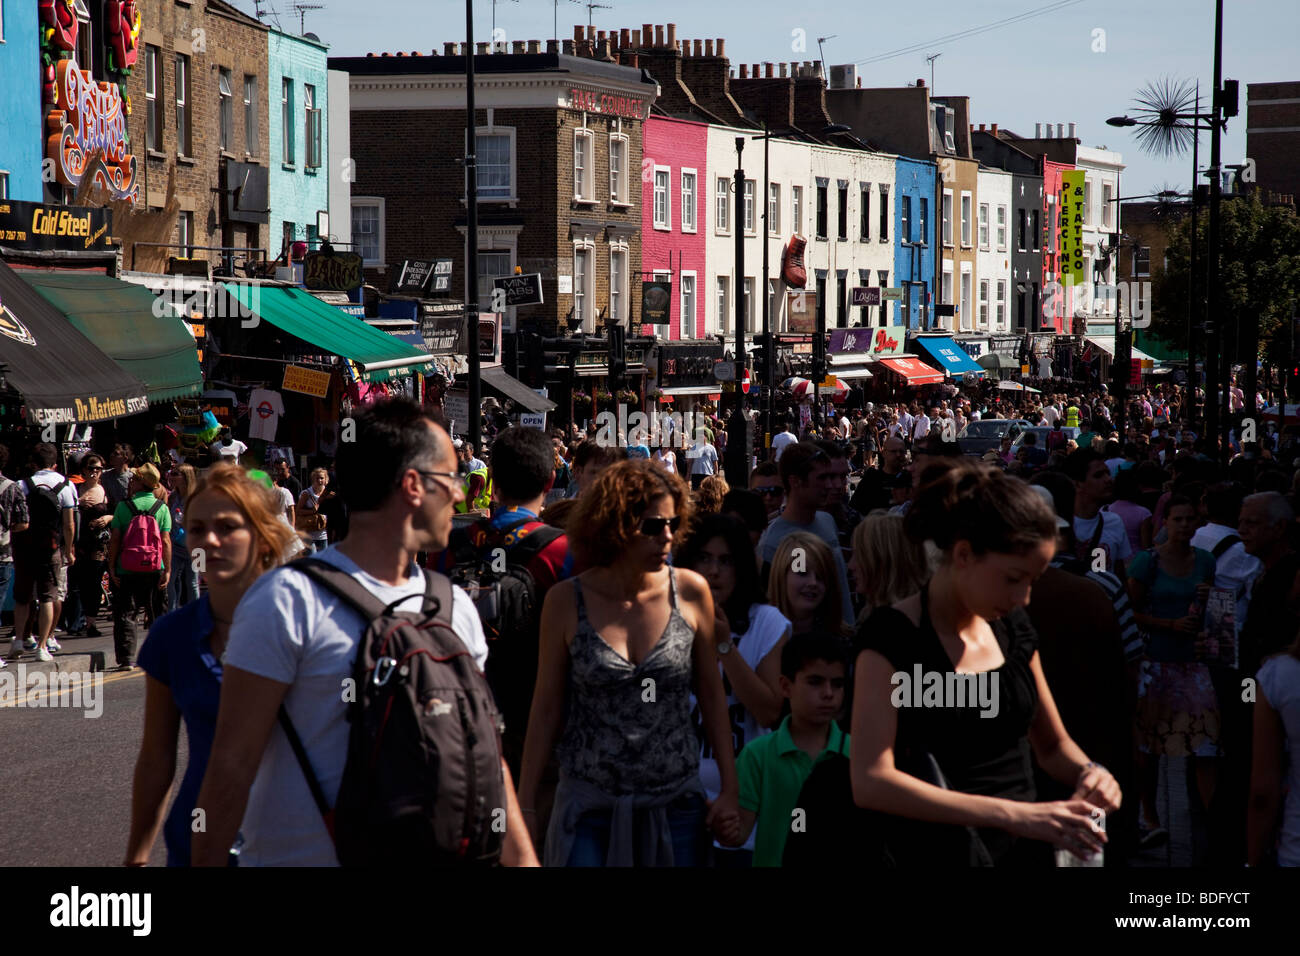 Street scene on a busy summer day on Camden High Street, London. Camden is a crowded hang out for young Londoners and tourists. Stock Photo